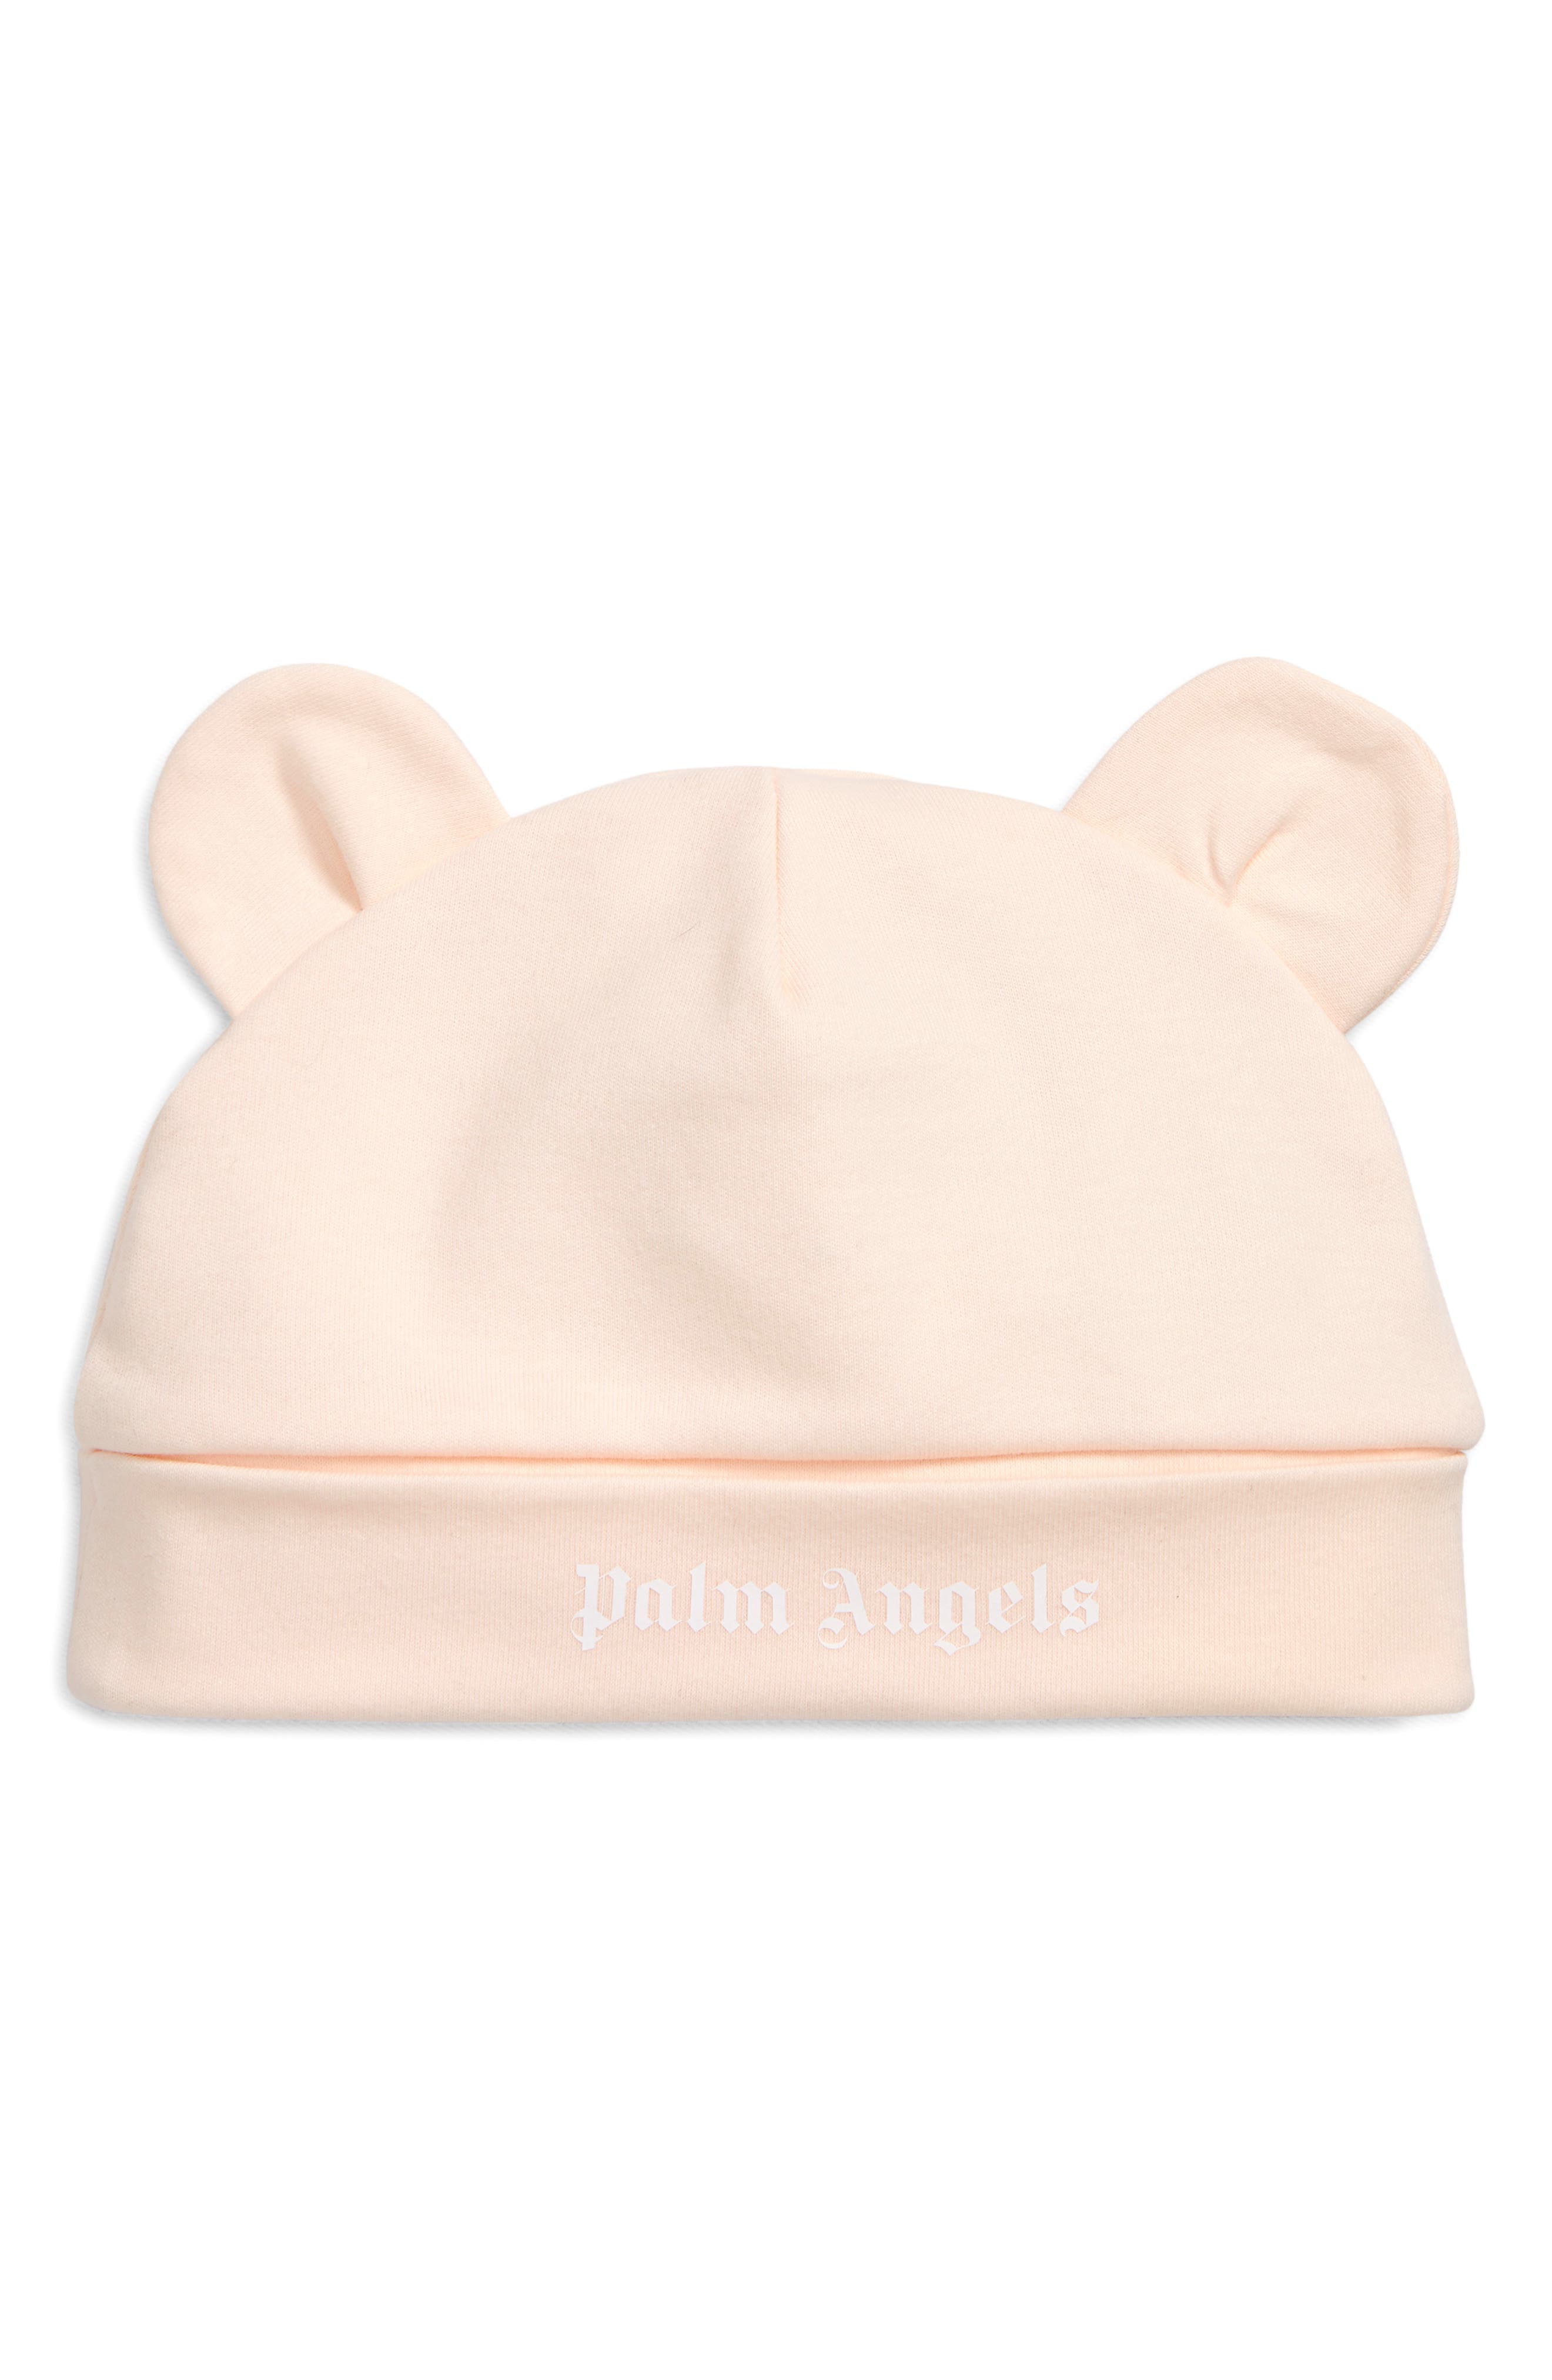 Boys' Palm Angels Accessories: Belts, Hats, Watches  More | Nordstrom